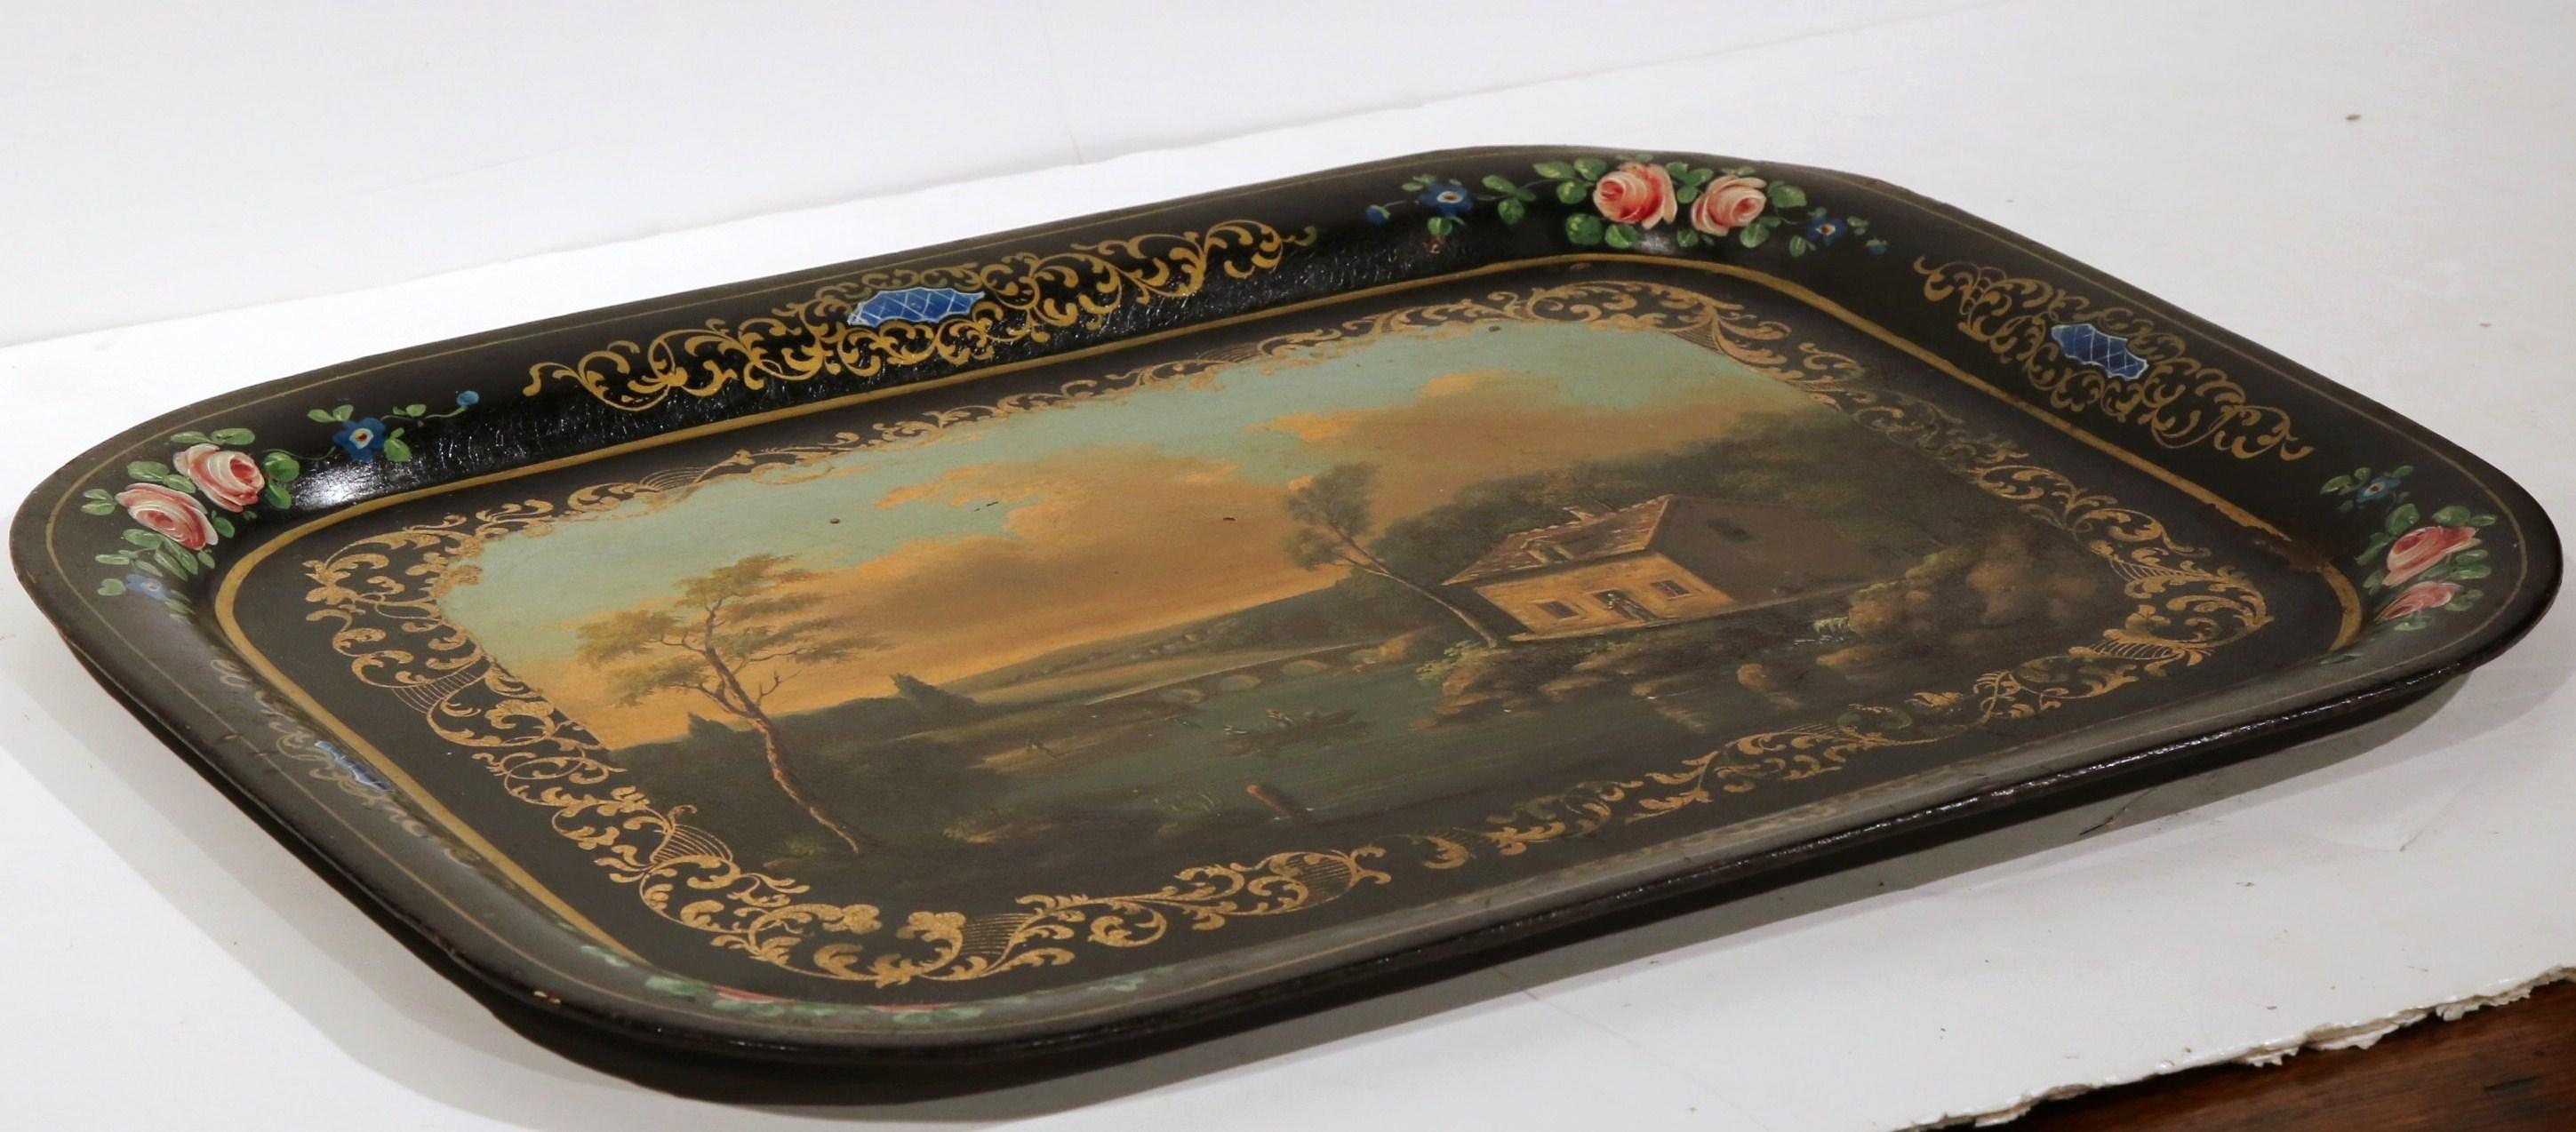 This elegant, hand painted rectangular tray was crafted in France, circa 1870. The colorful, antique platter features a picturesque, hand painted pastoral scene with a lake, bridge and farm. The composition is in excellent condition, and has